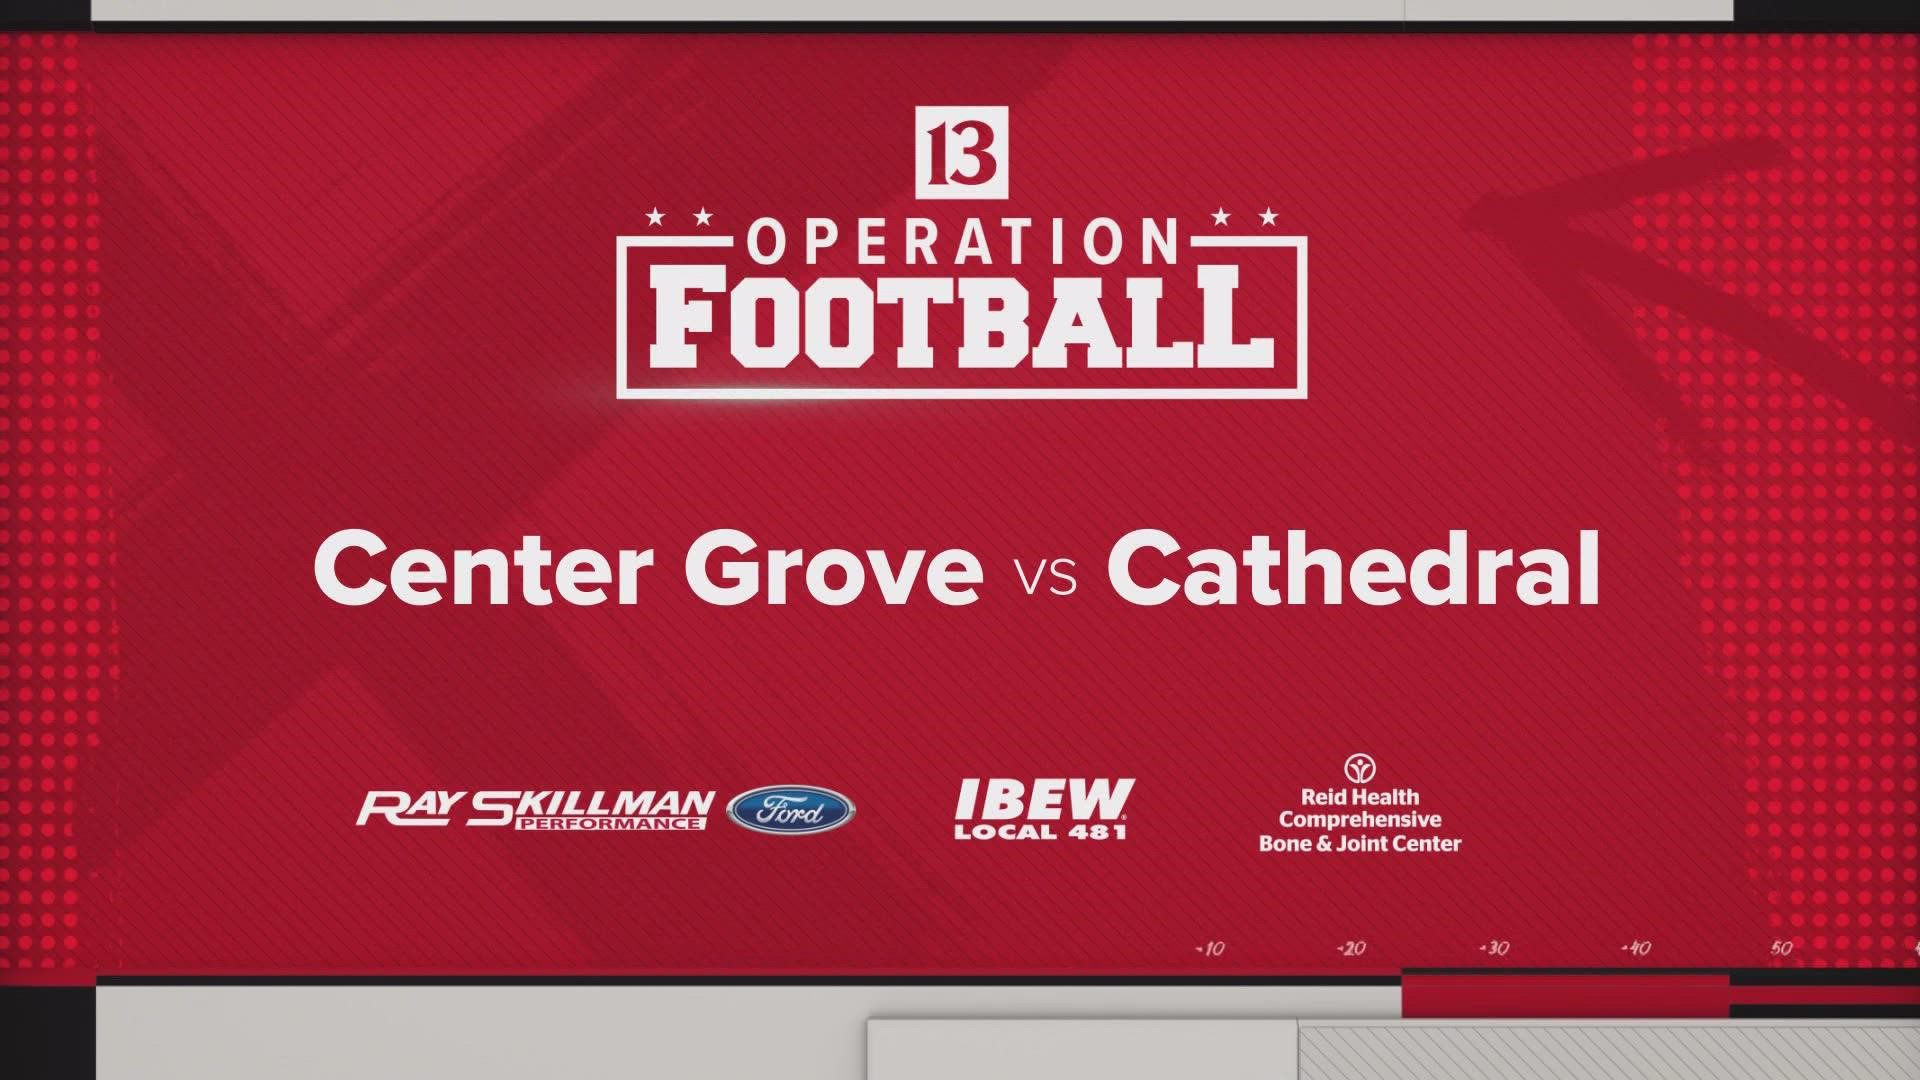 It's Center Grove vs. Cathedral tonight in Operation Football.